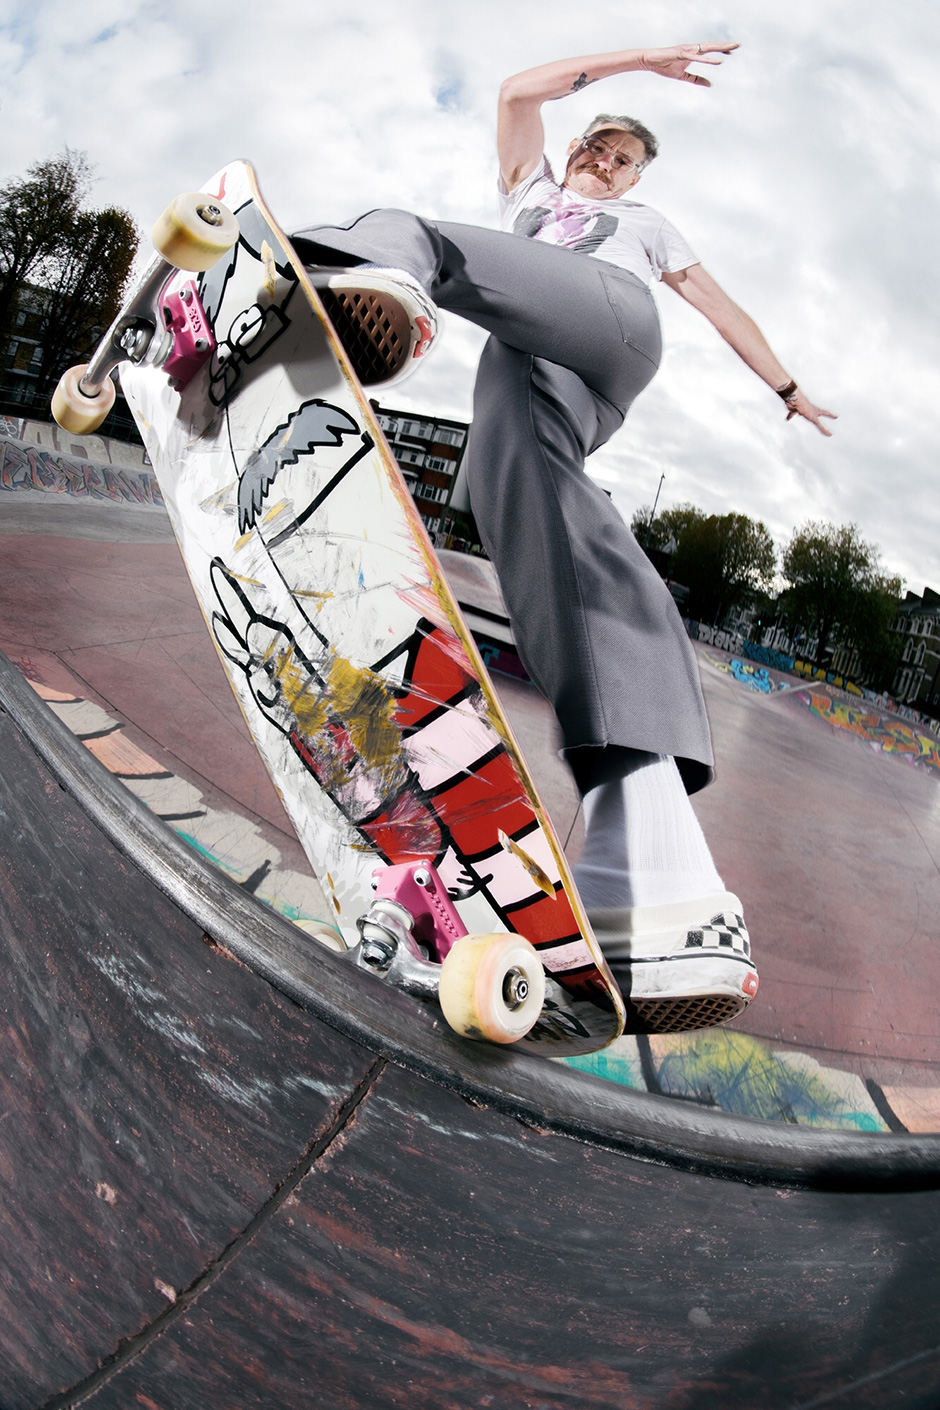 Chris Pulman takes his twister grind to the quarter at the newly revamped Stockwell skateparkStockwell